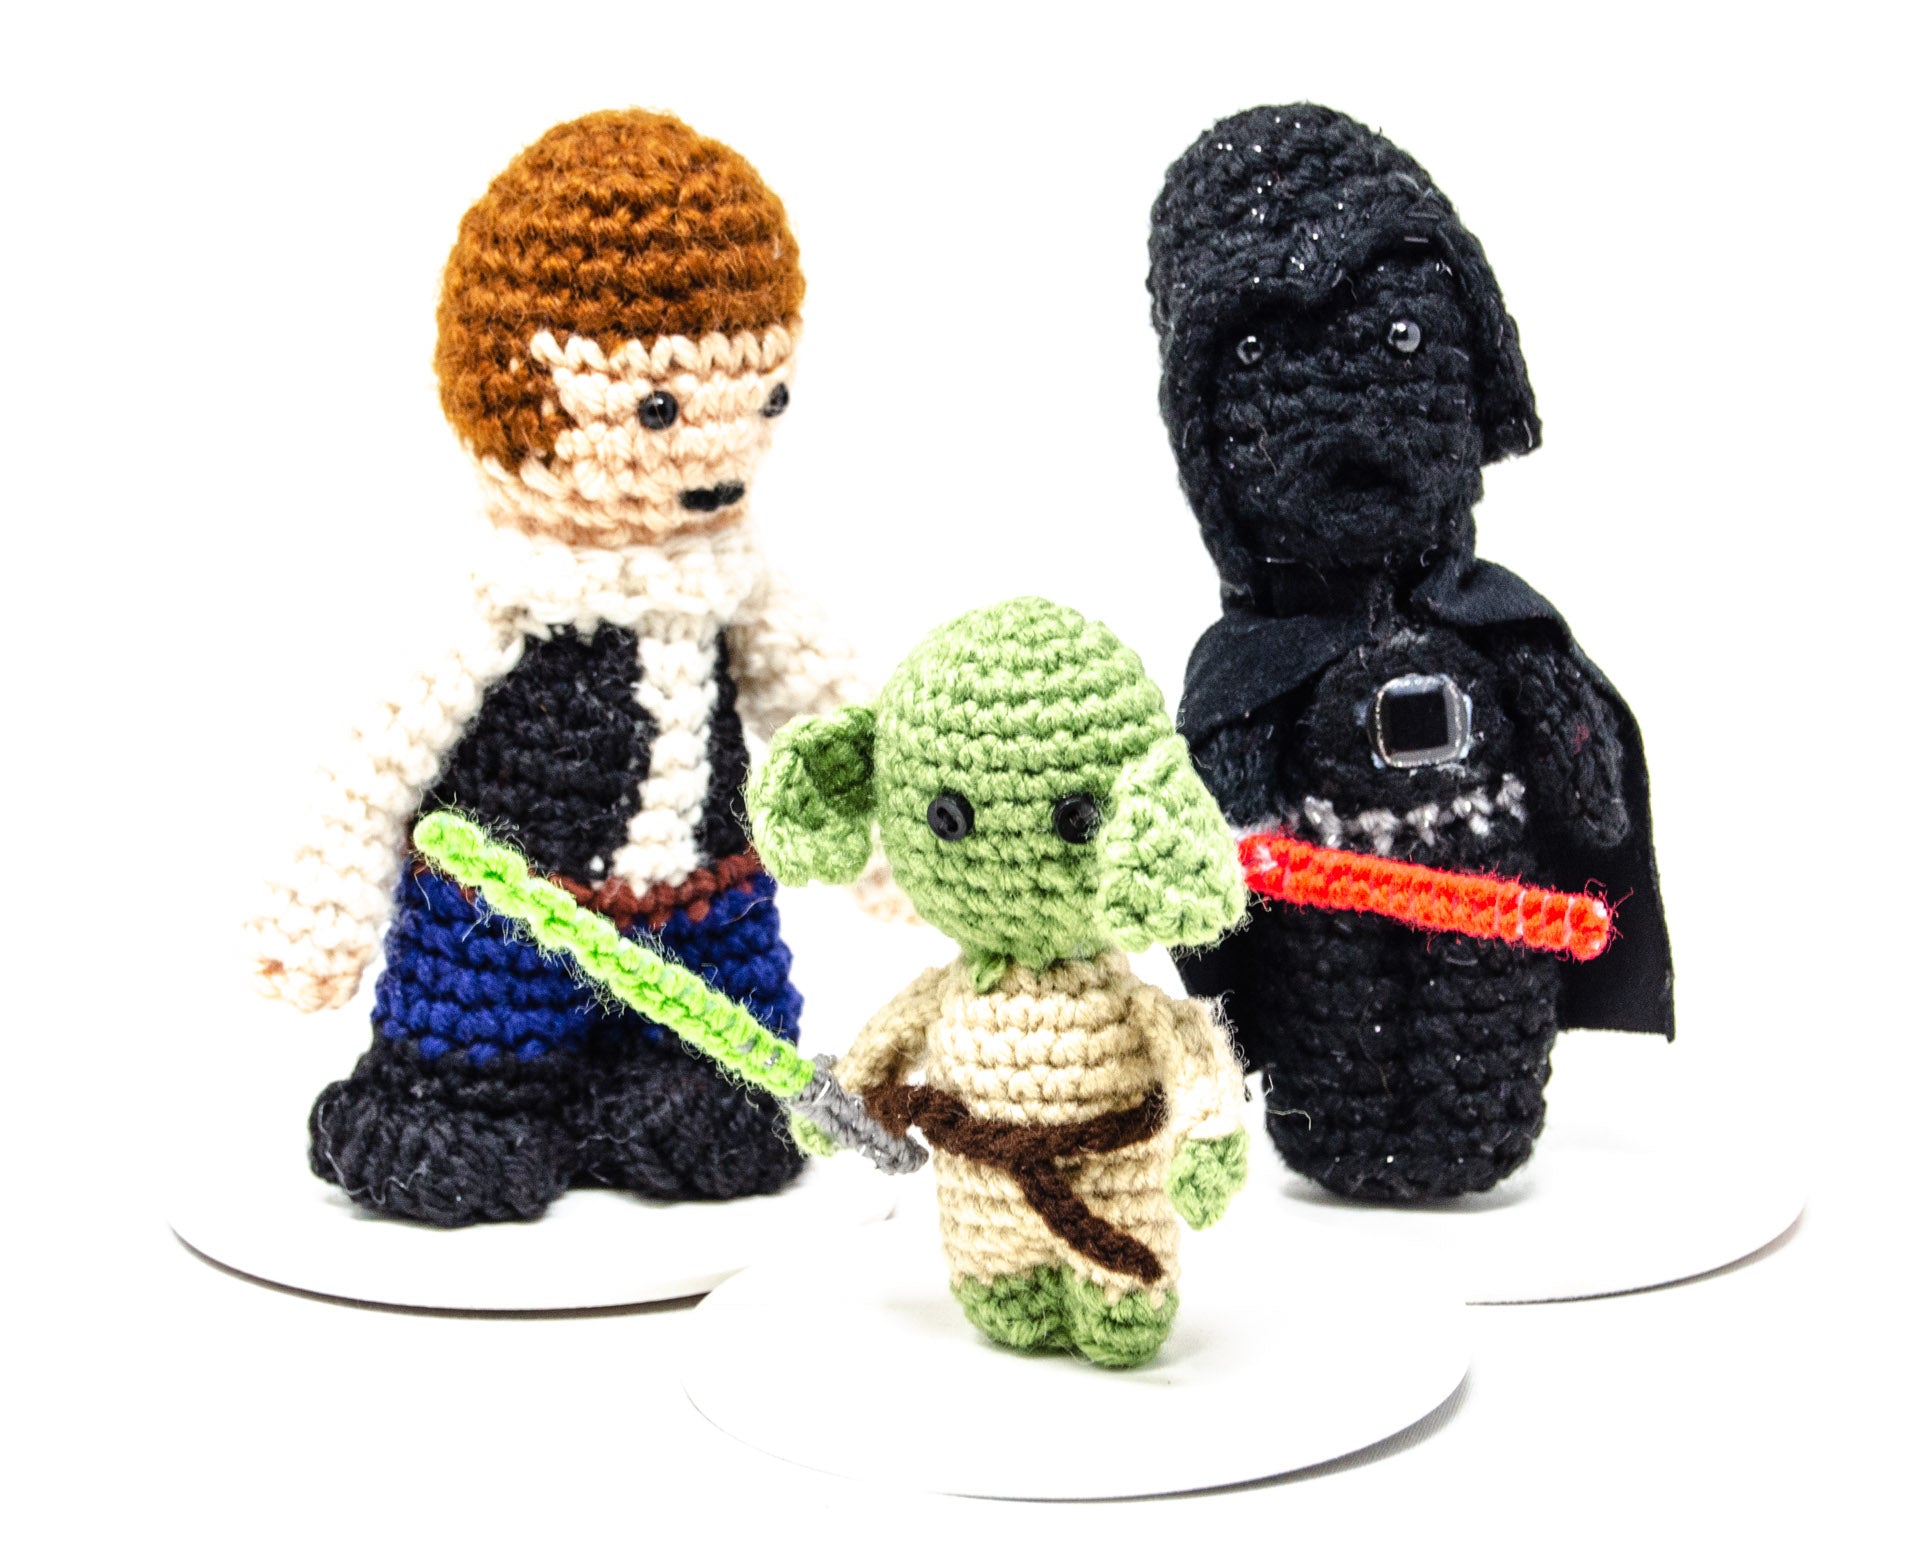 Star Wars Knitted Figures